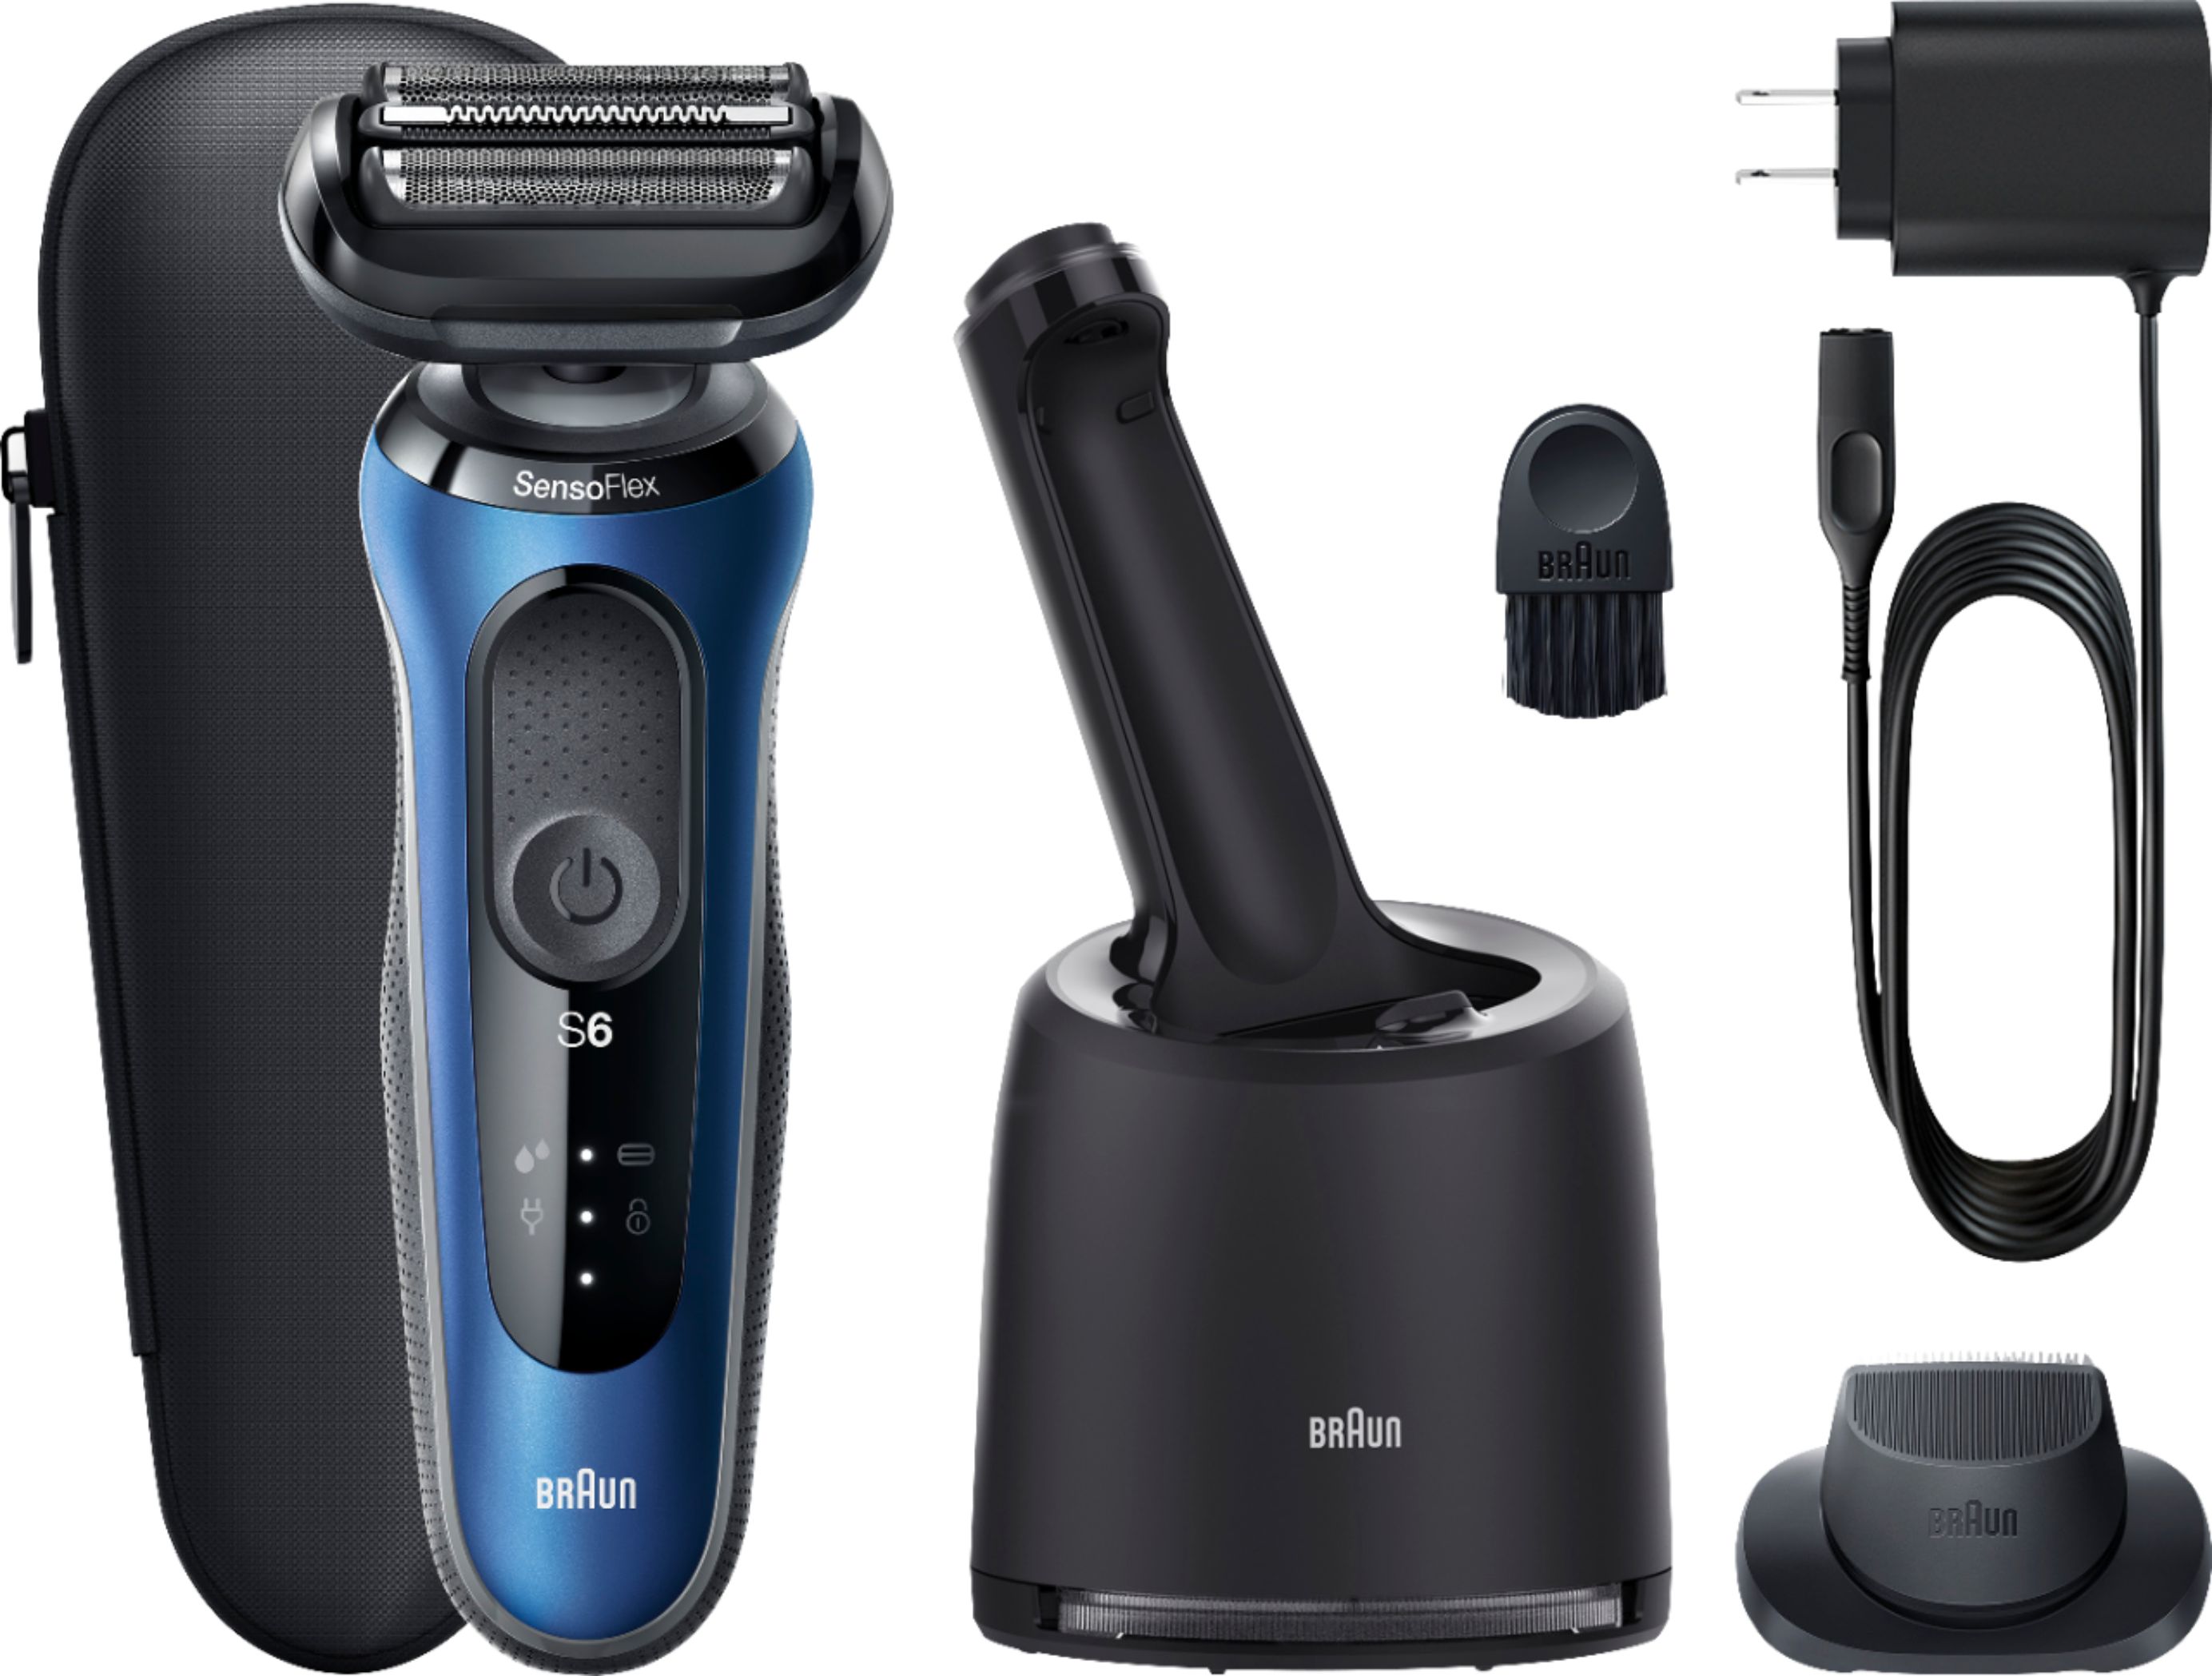 braun shaver with pop up trimmer